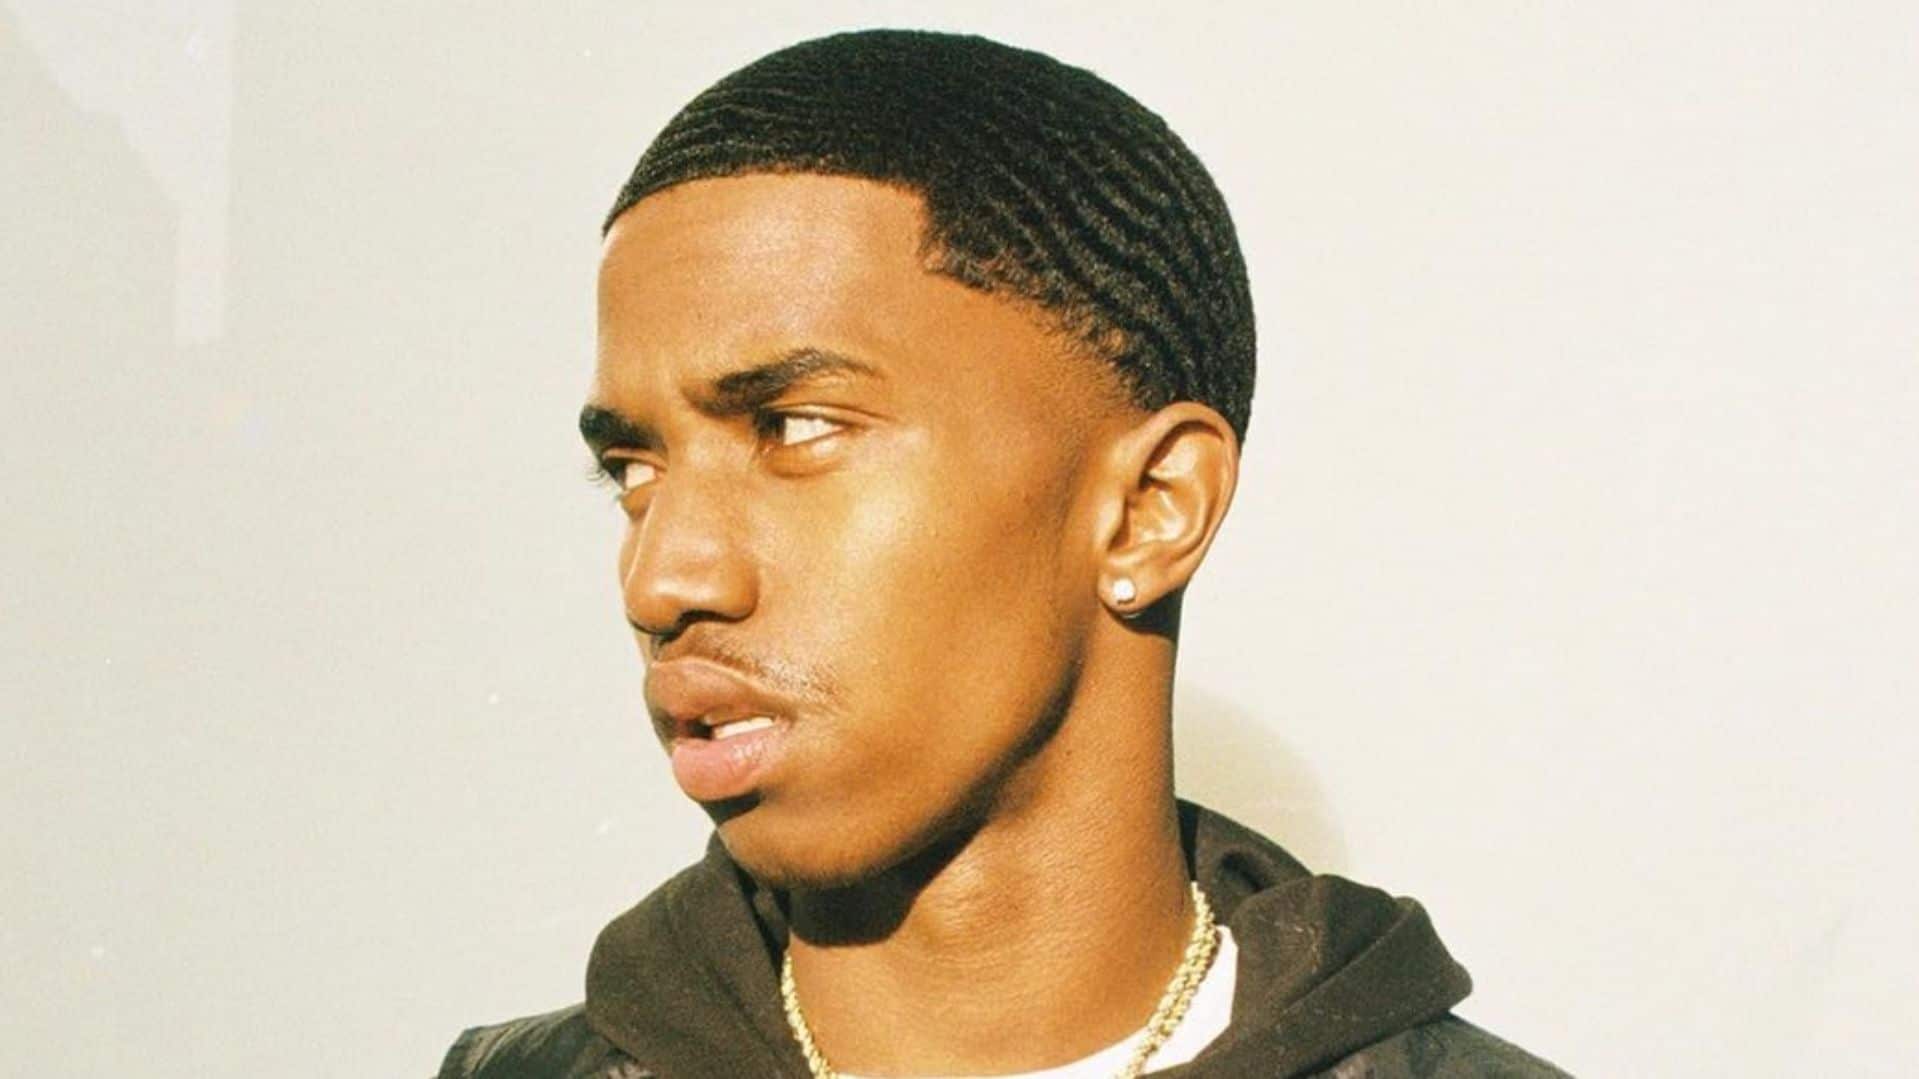 WATCH: Christian Combs Is Carrying On The Bad Boy Legacy With New EP 'Cyncerely, C3'